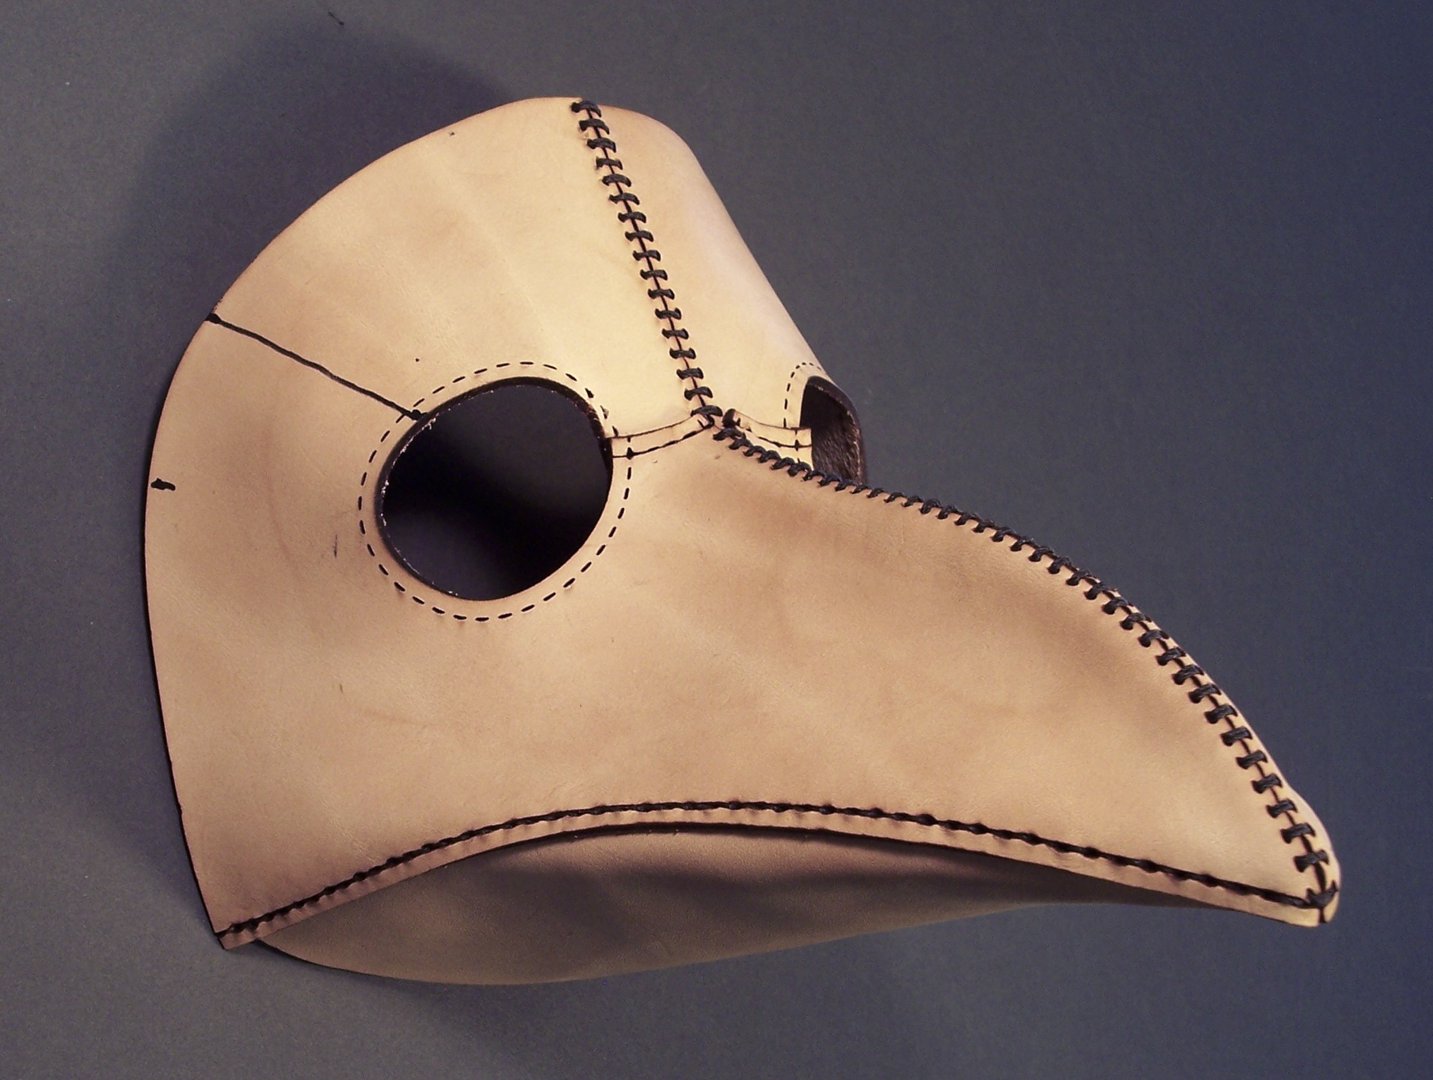 tom-banwell-leather-and-resin-projects-plague-doctor-mask